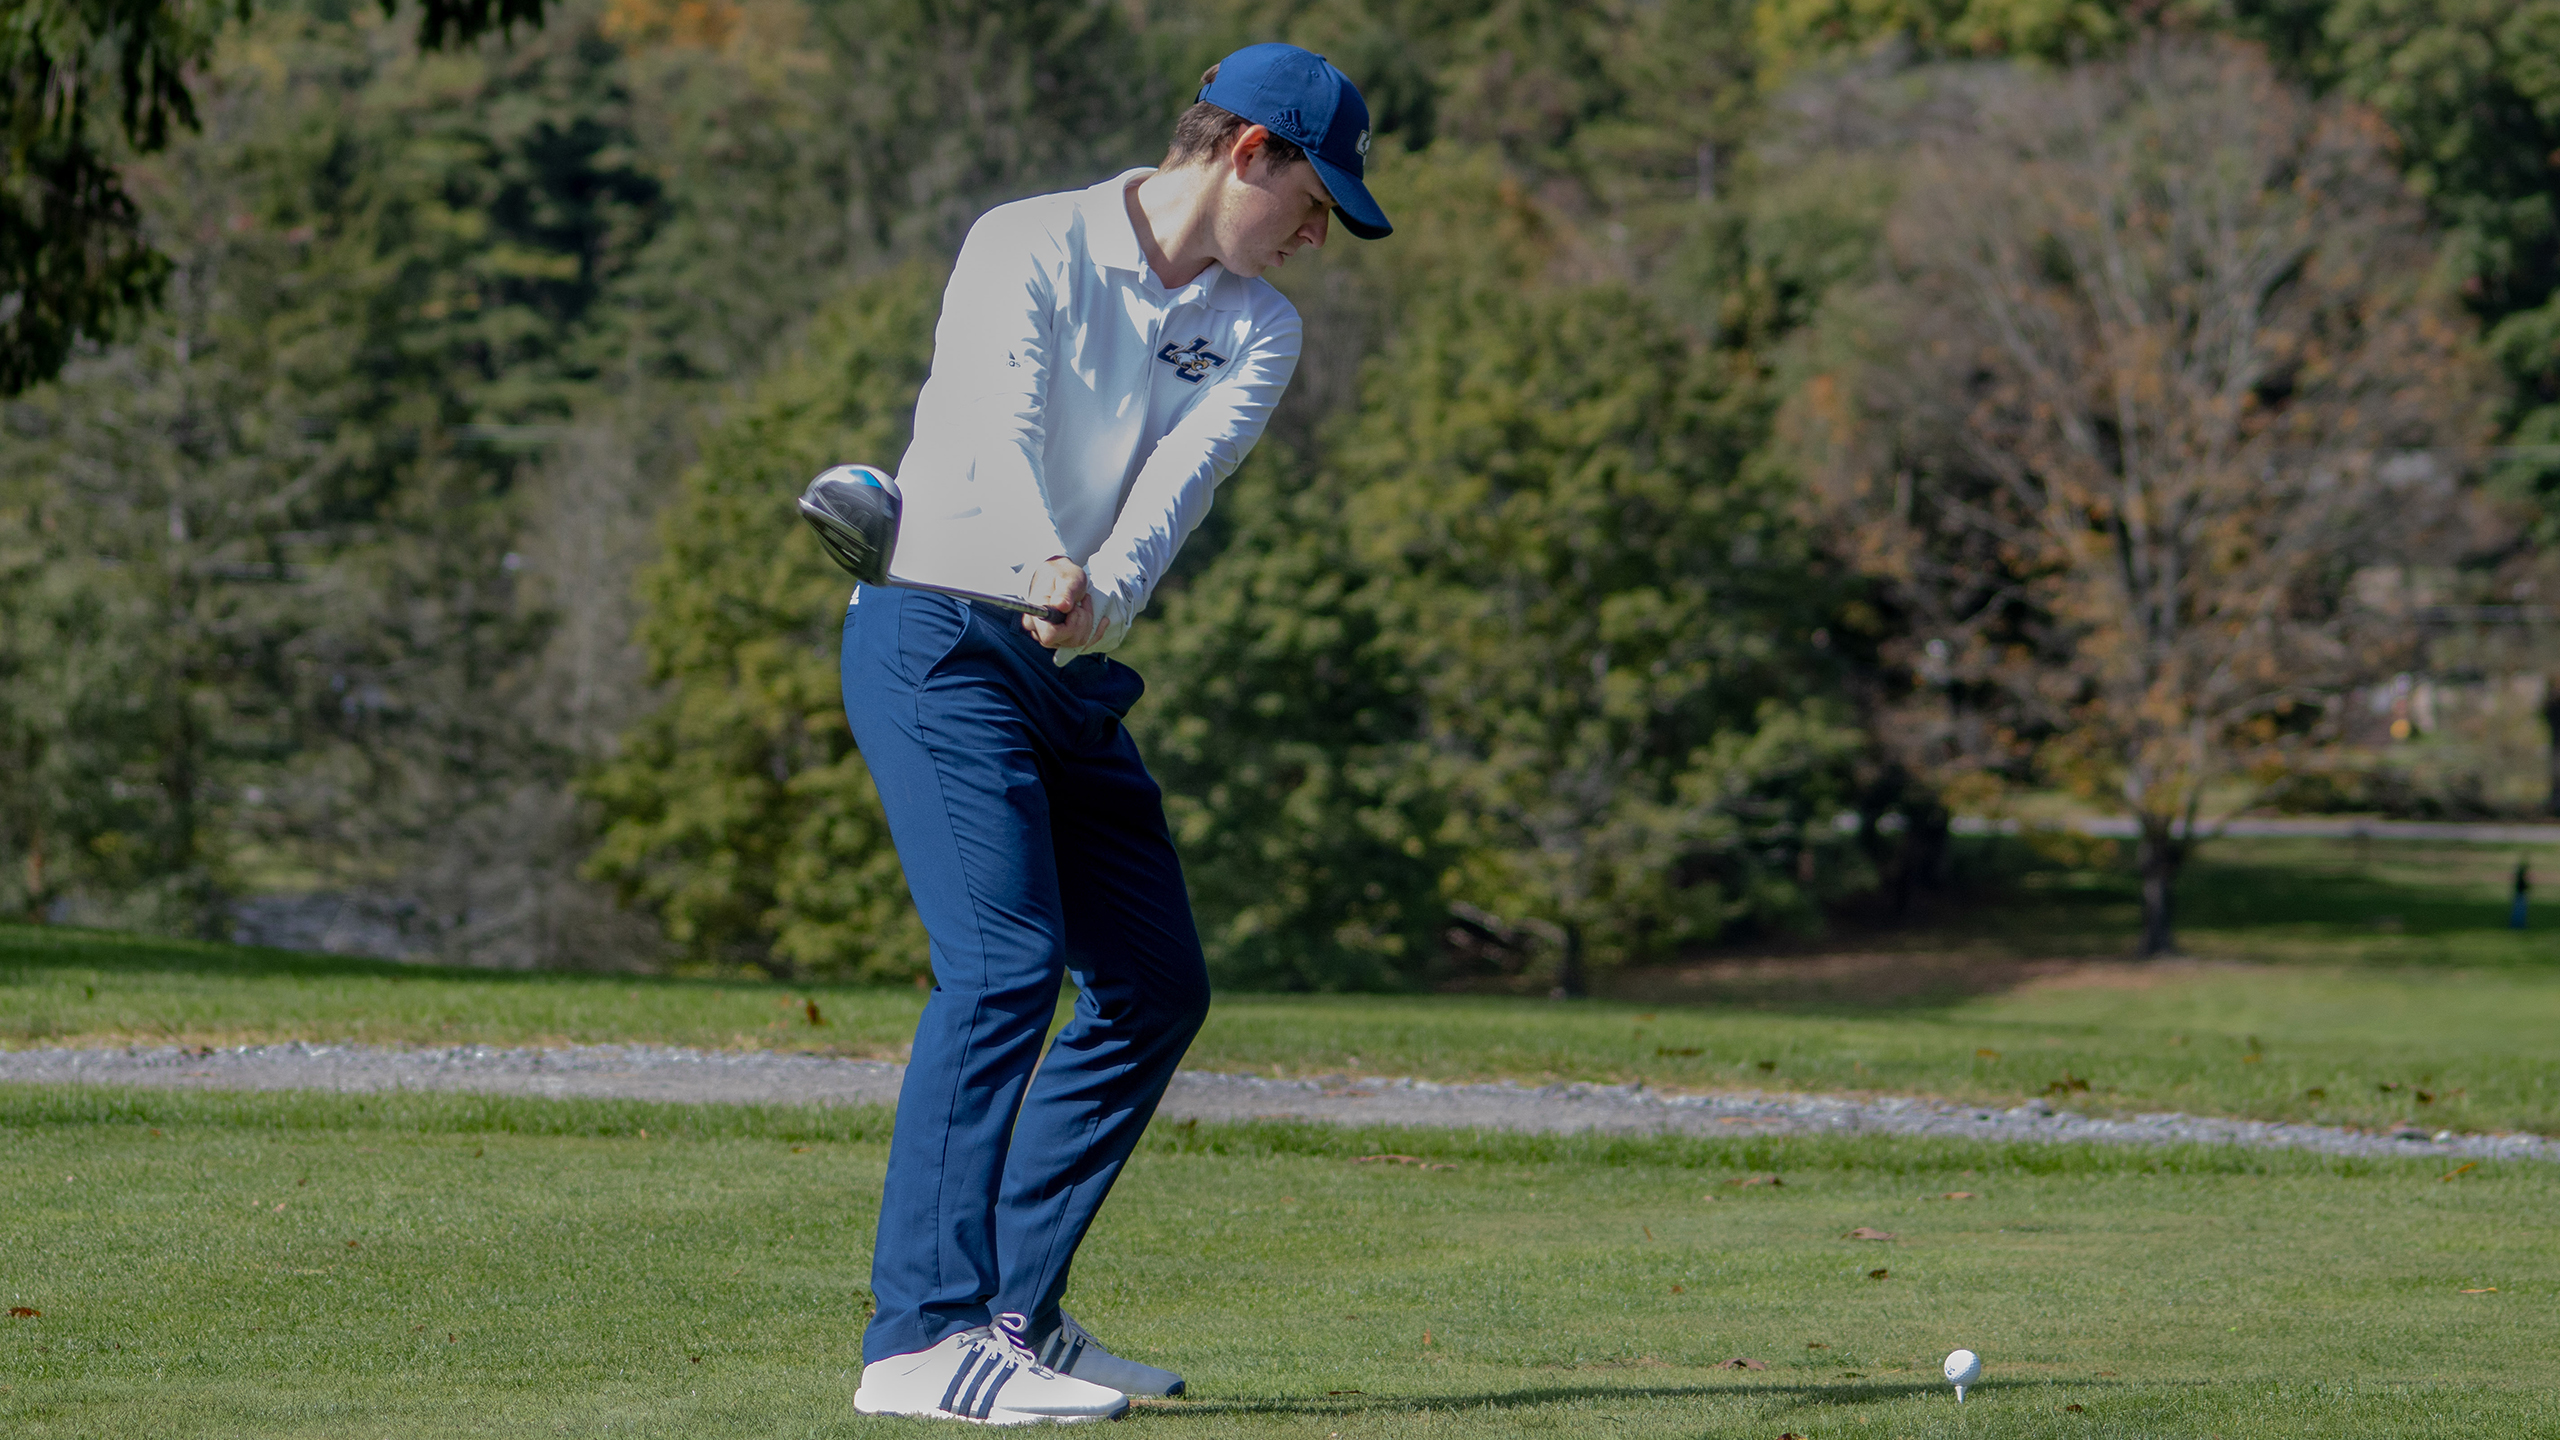 Juniata Men’s Golf Finishes in 8th at the Northeast Shootout